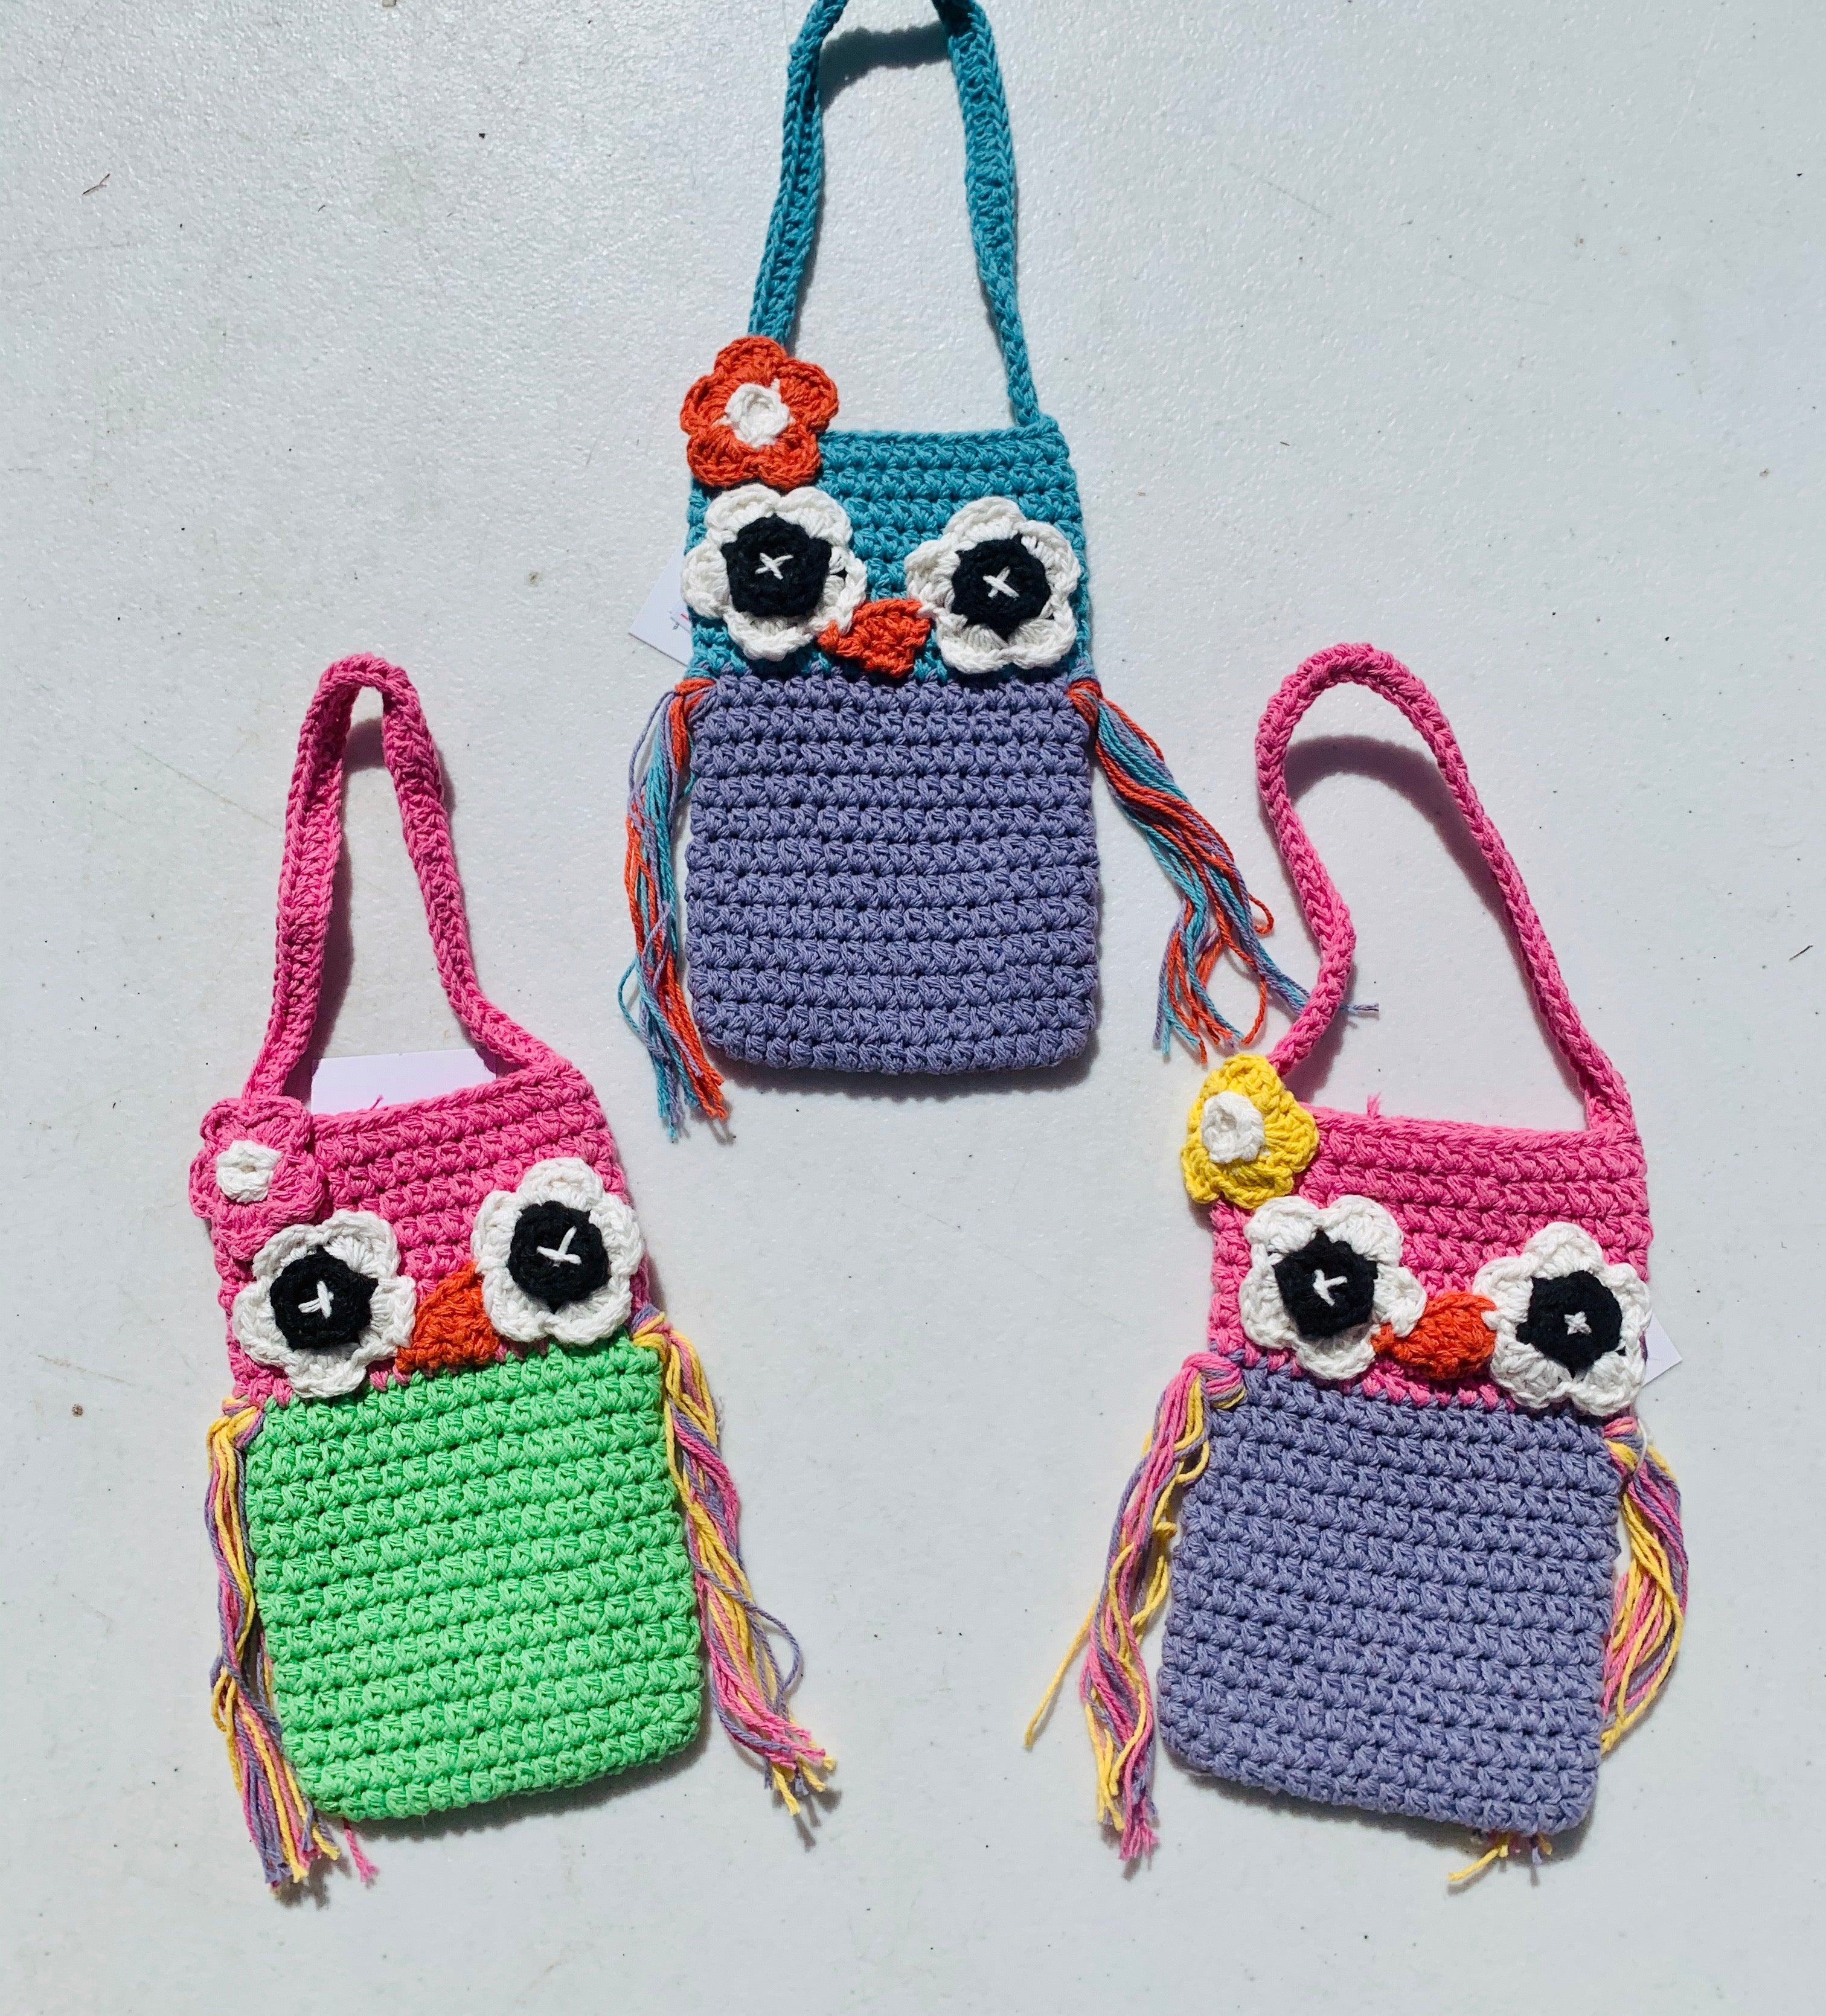 Knit Small Owl Bag / Pouch